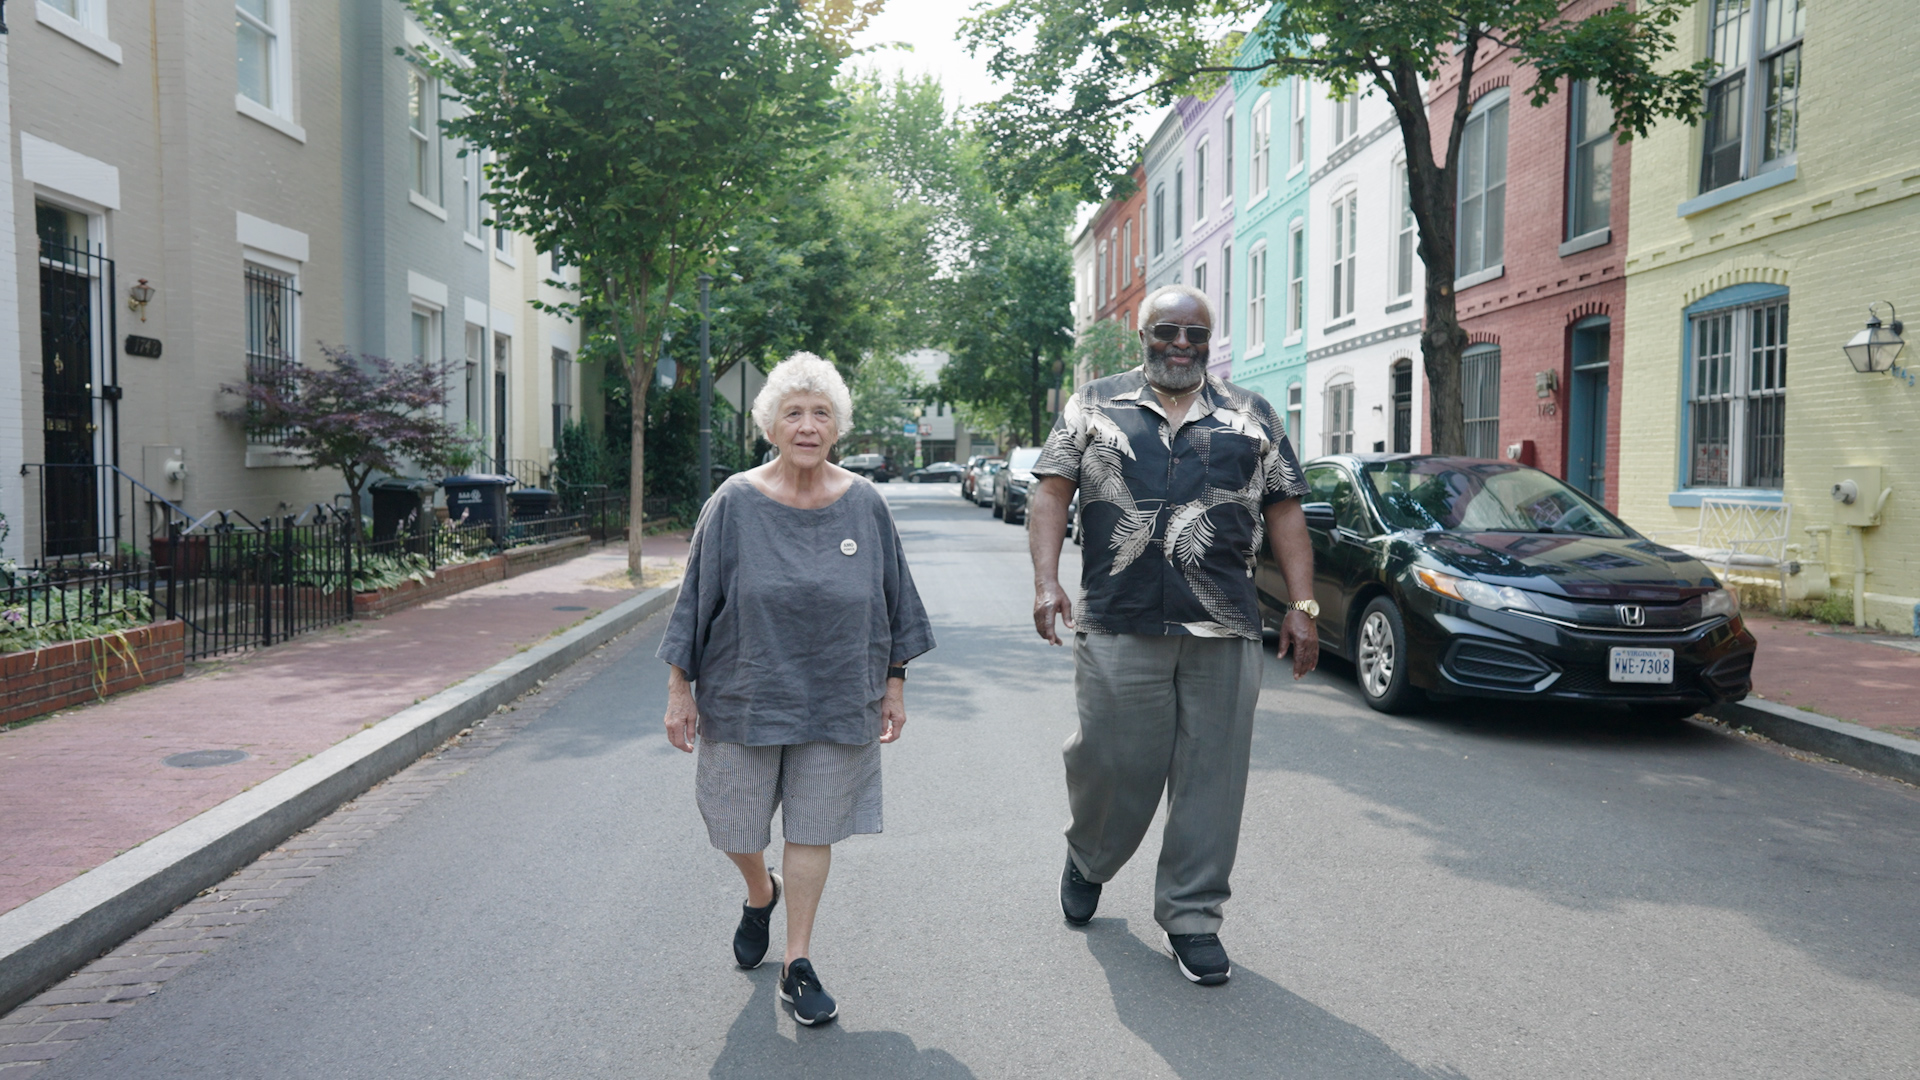 Older activists talking about the struggle to save adams morgan